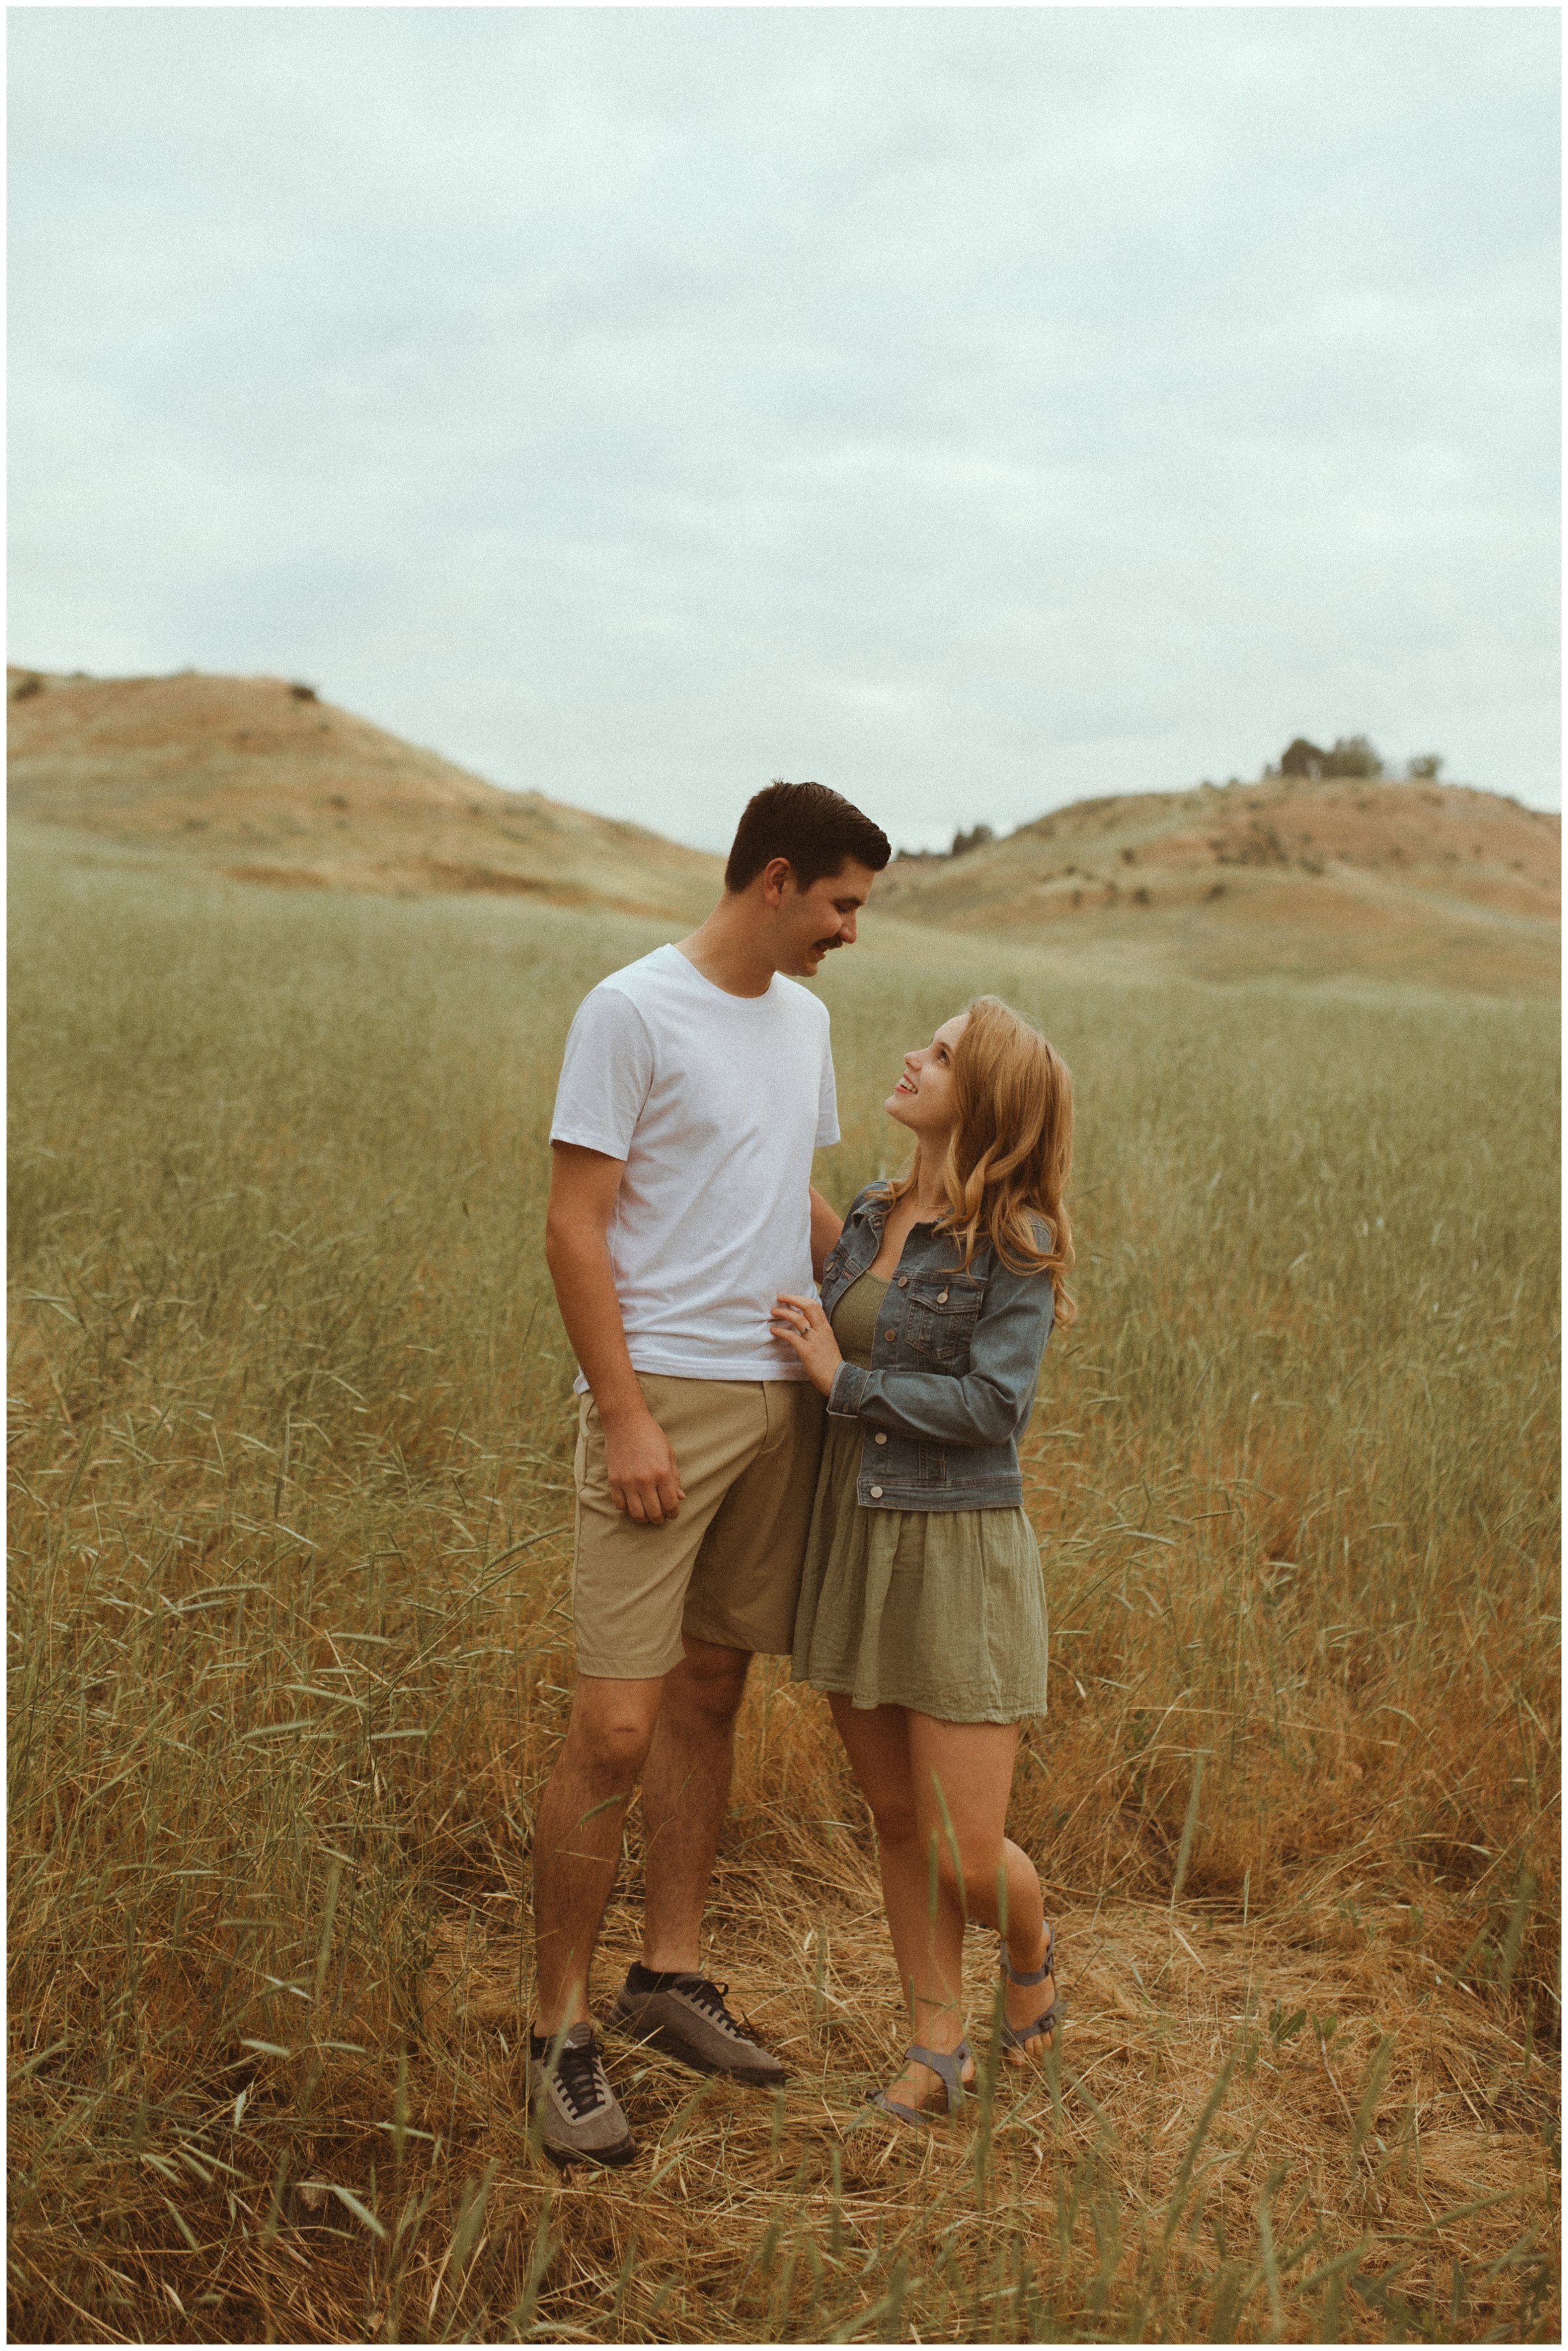  Allison &amp; Kyle’s Mini Couple’s Session in the Boise Foothills by Boise Portrait Photographer, Kamra Fuller Photography 